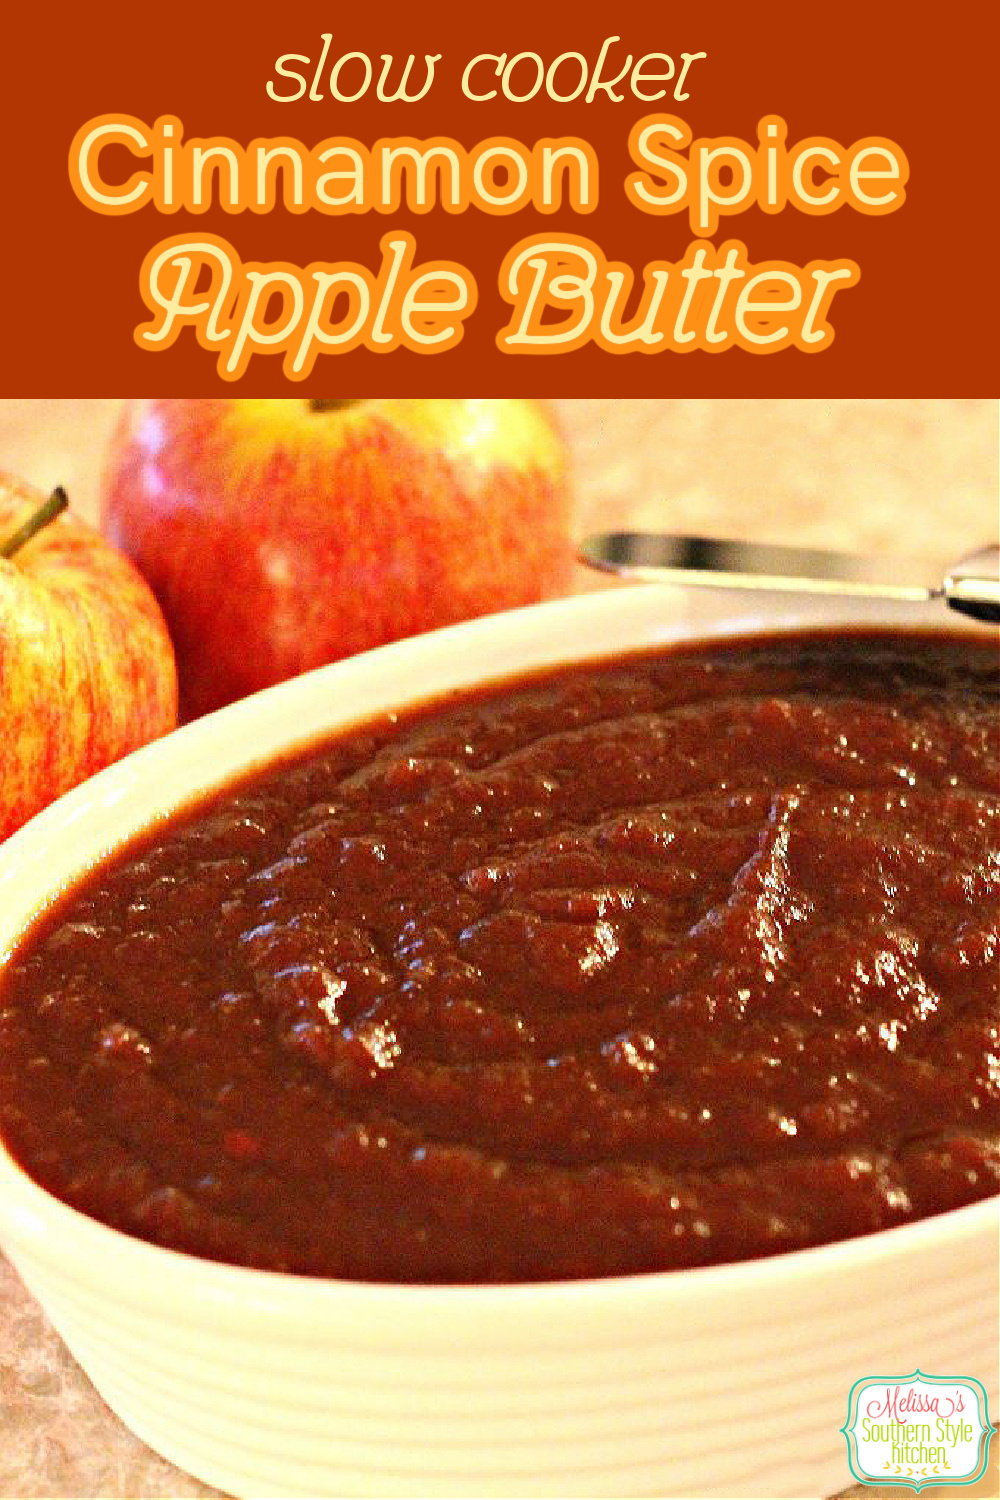 Simmer this sweet and cinnamon spiced apple butter in your slow cooker and the house will smell wonderful, too! #applebutter #apples #slowcooked #slowcooker #crockpot #brunch #jams #breakfast #appleseason #harvest #southernfood #southernrecipes via @melissasssk